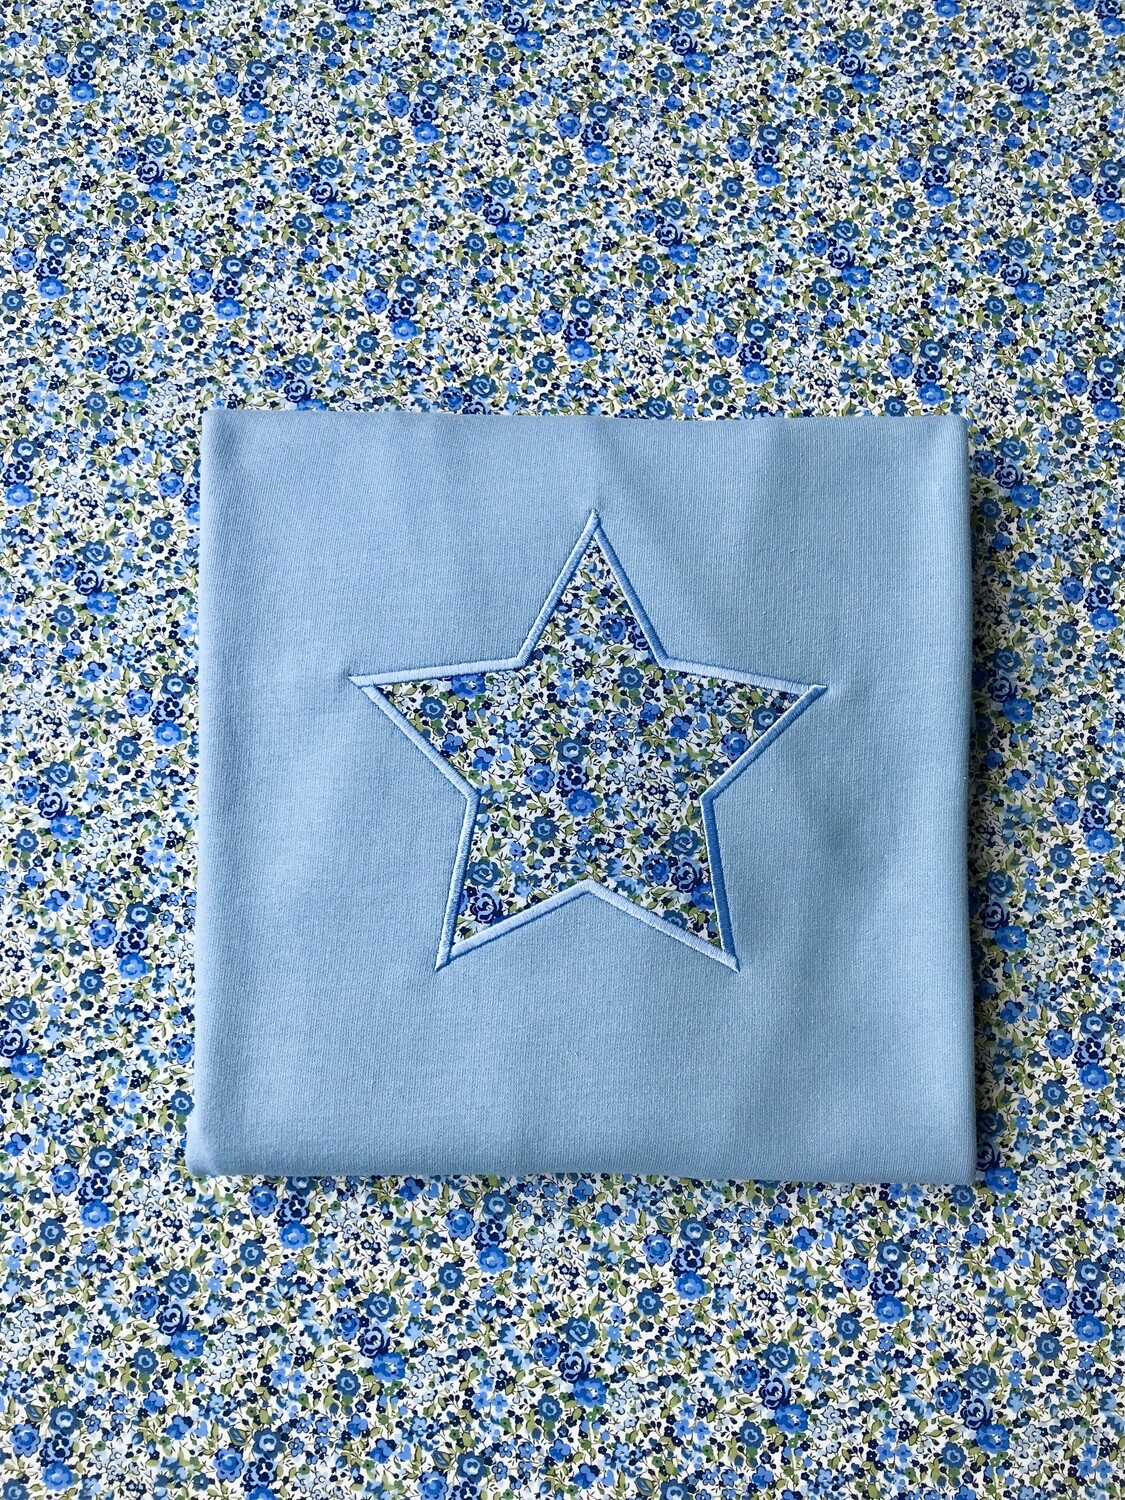 Star Design On Relaxed Fit Sweatshirt